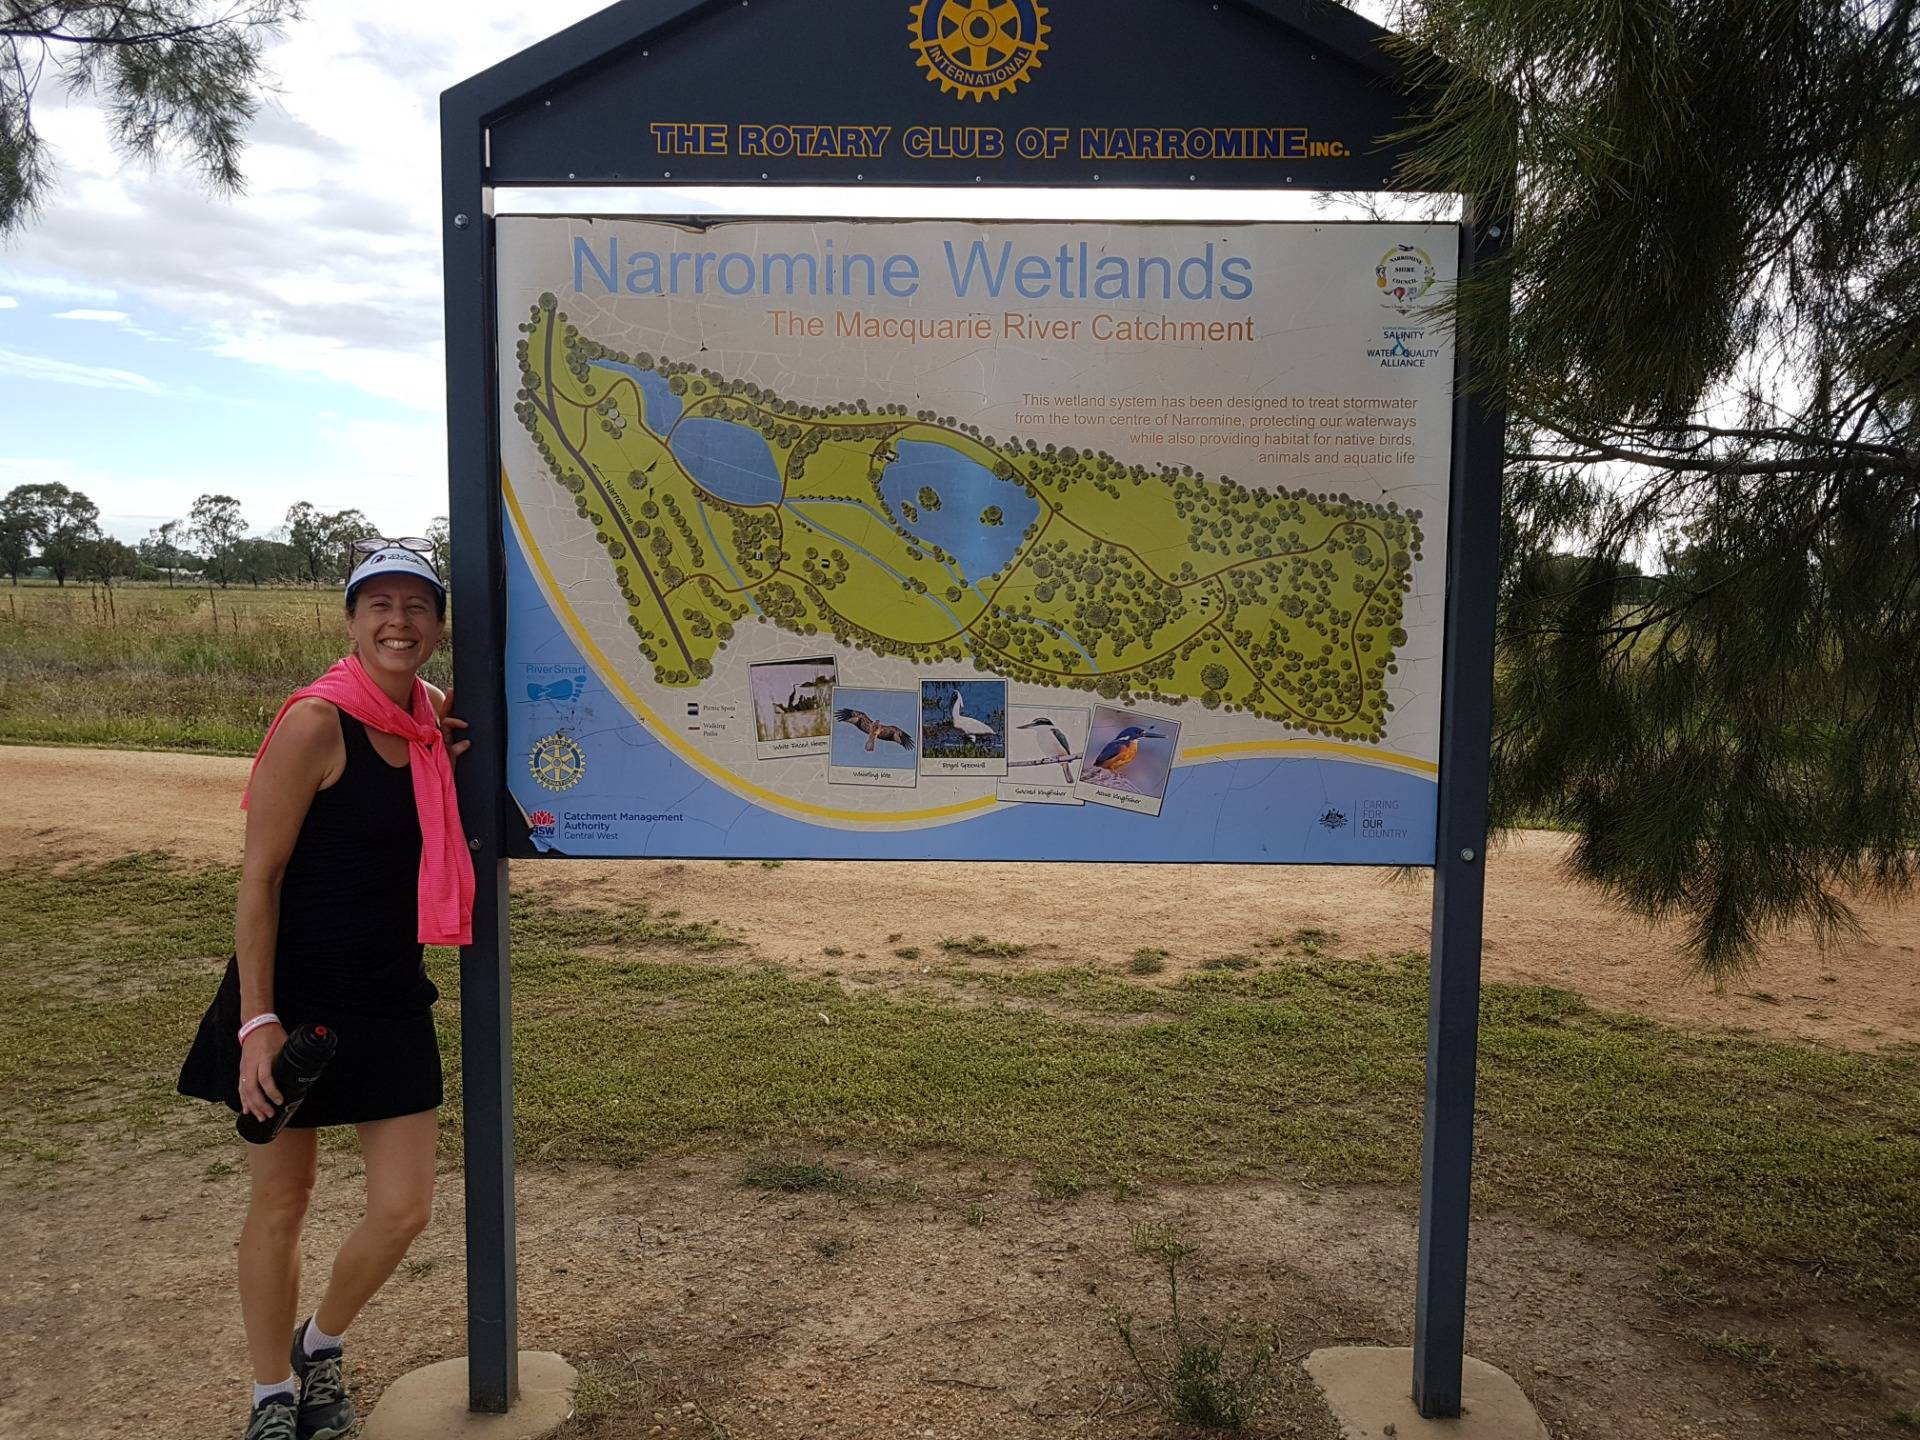 We managed a little exploring of the wetlands straight after parkrun. It was good to explore as you can miss a fair bit when you’re running around the place.